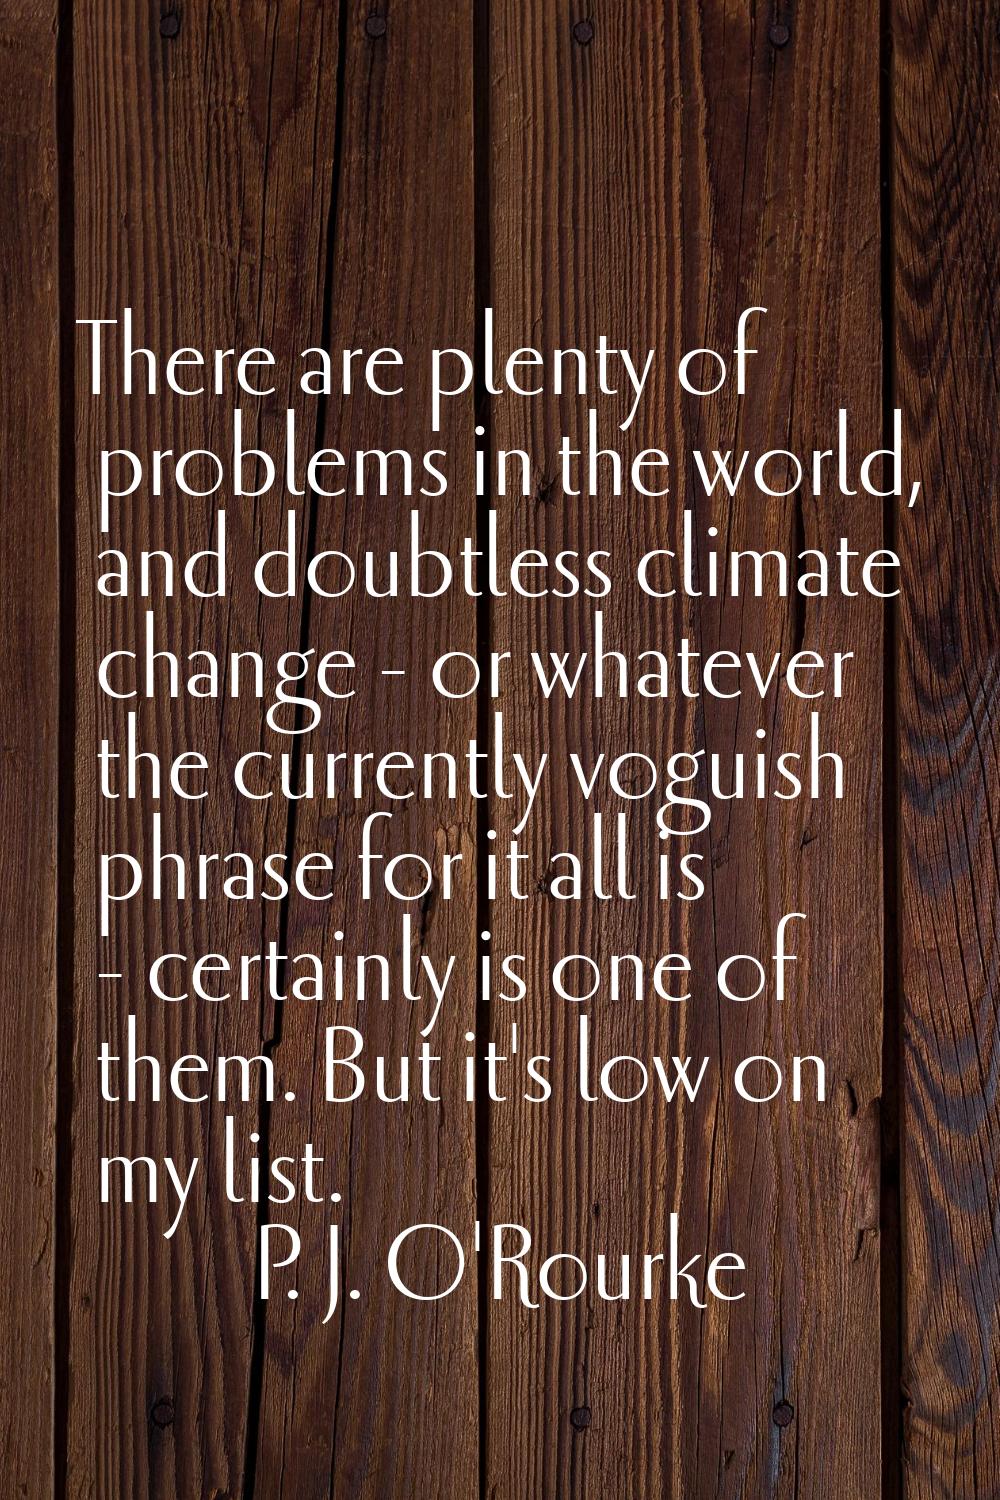 There are plenty of problems in the world, and doubtless climate change - or whatever the currently